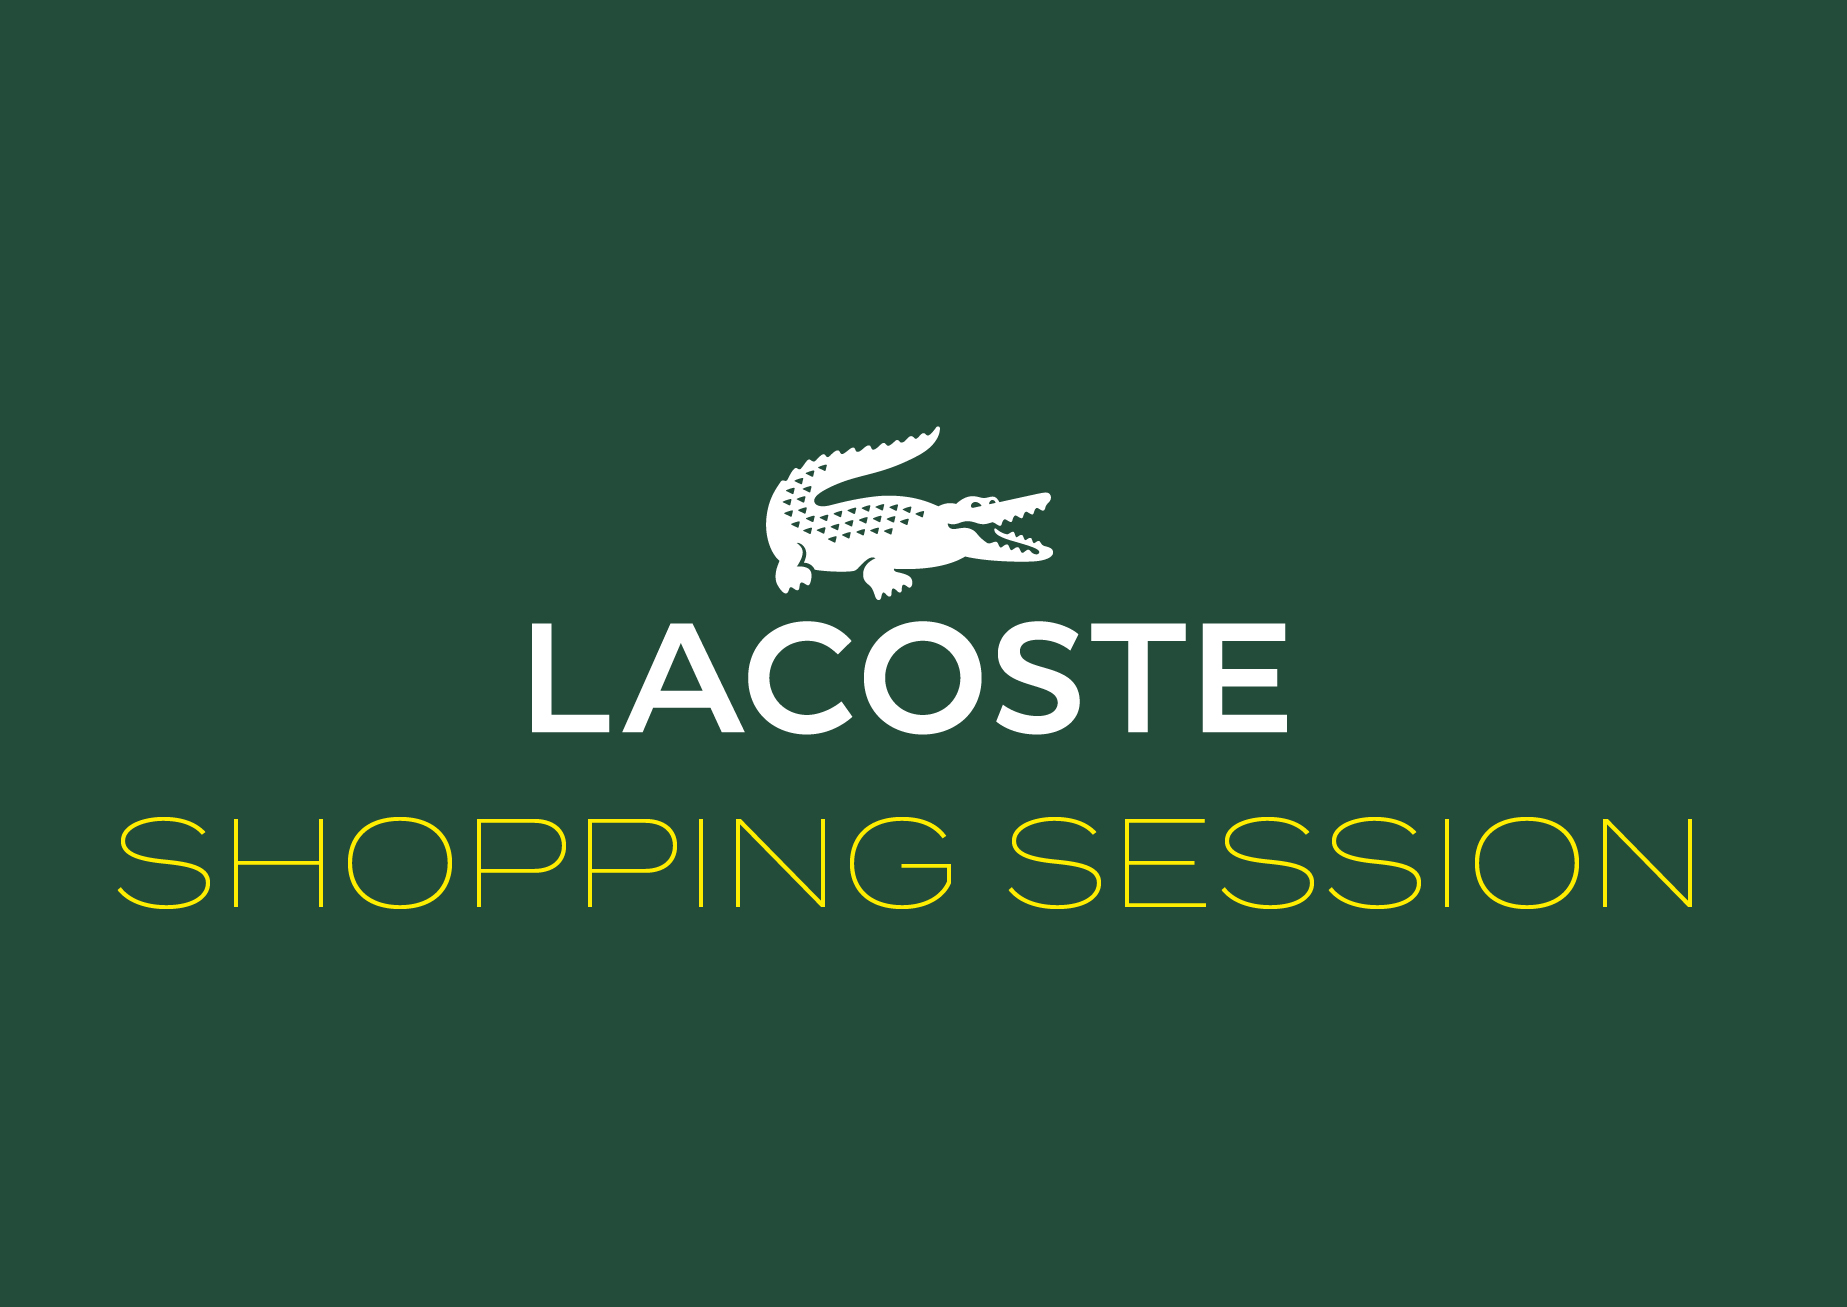 LACOSTE shopping session